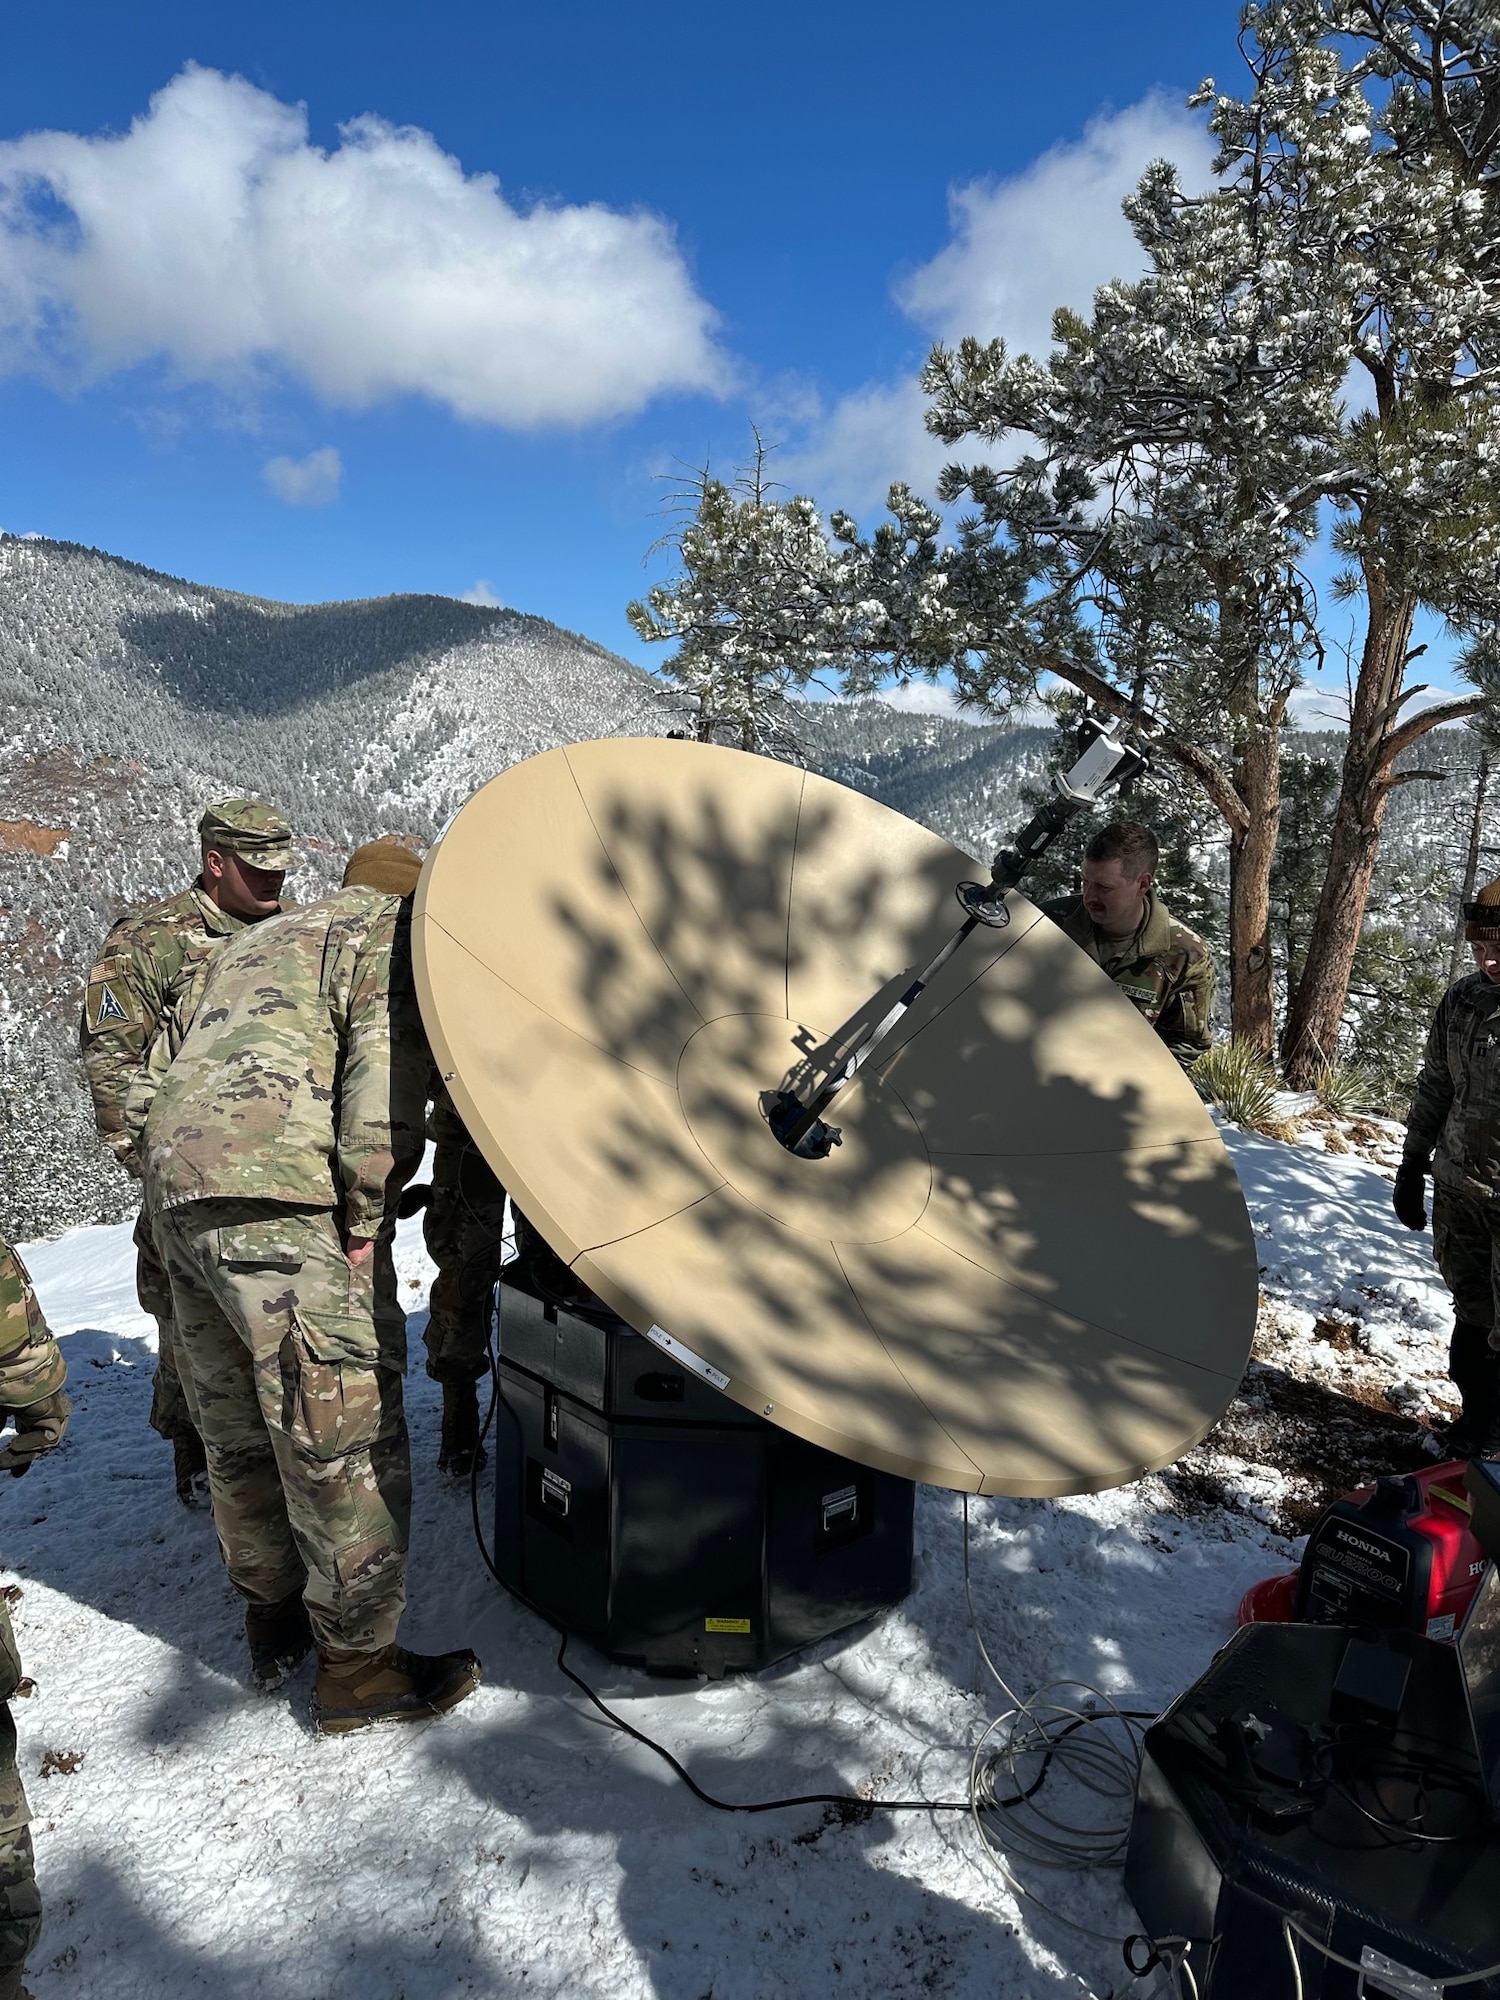 PETERSON SPACE FORCE BASE, Colorado - Members of Space Delta 3's Quick Reaction Force assist in setting up the Electromagnetic Warfare system. The QRF completed the Crucible event—a 4-mile, 1,292 ft. elevation gain hike—on April 6 where the team transported a 500+ pound Electromagnetic Warfare system and set up operations mountain-side, proving the agility and mobility of both the developmental system and the team. (Courtesy Photo)